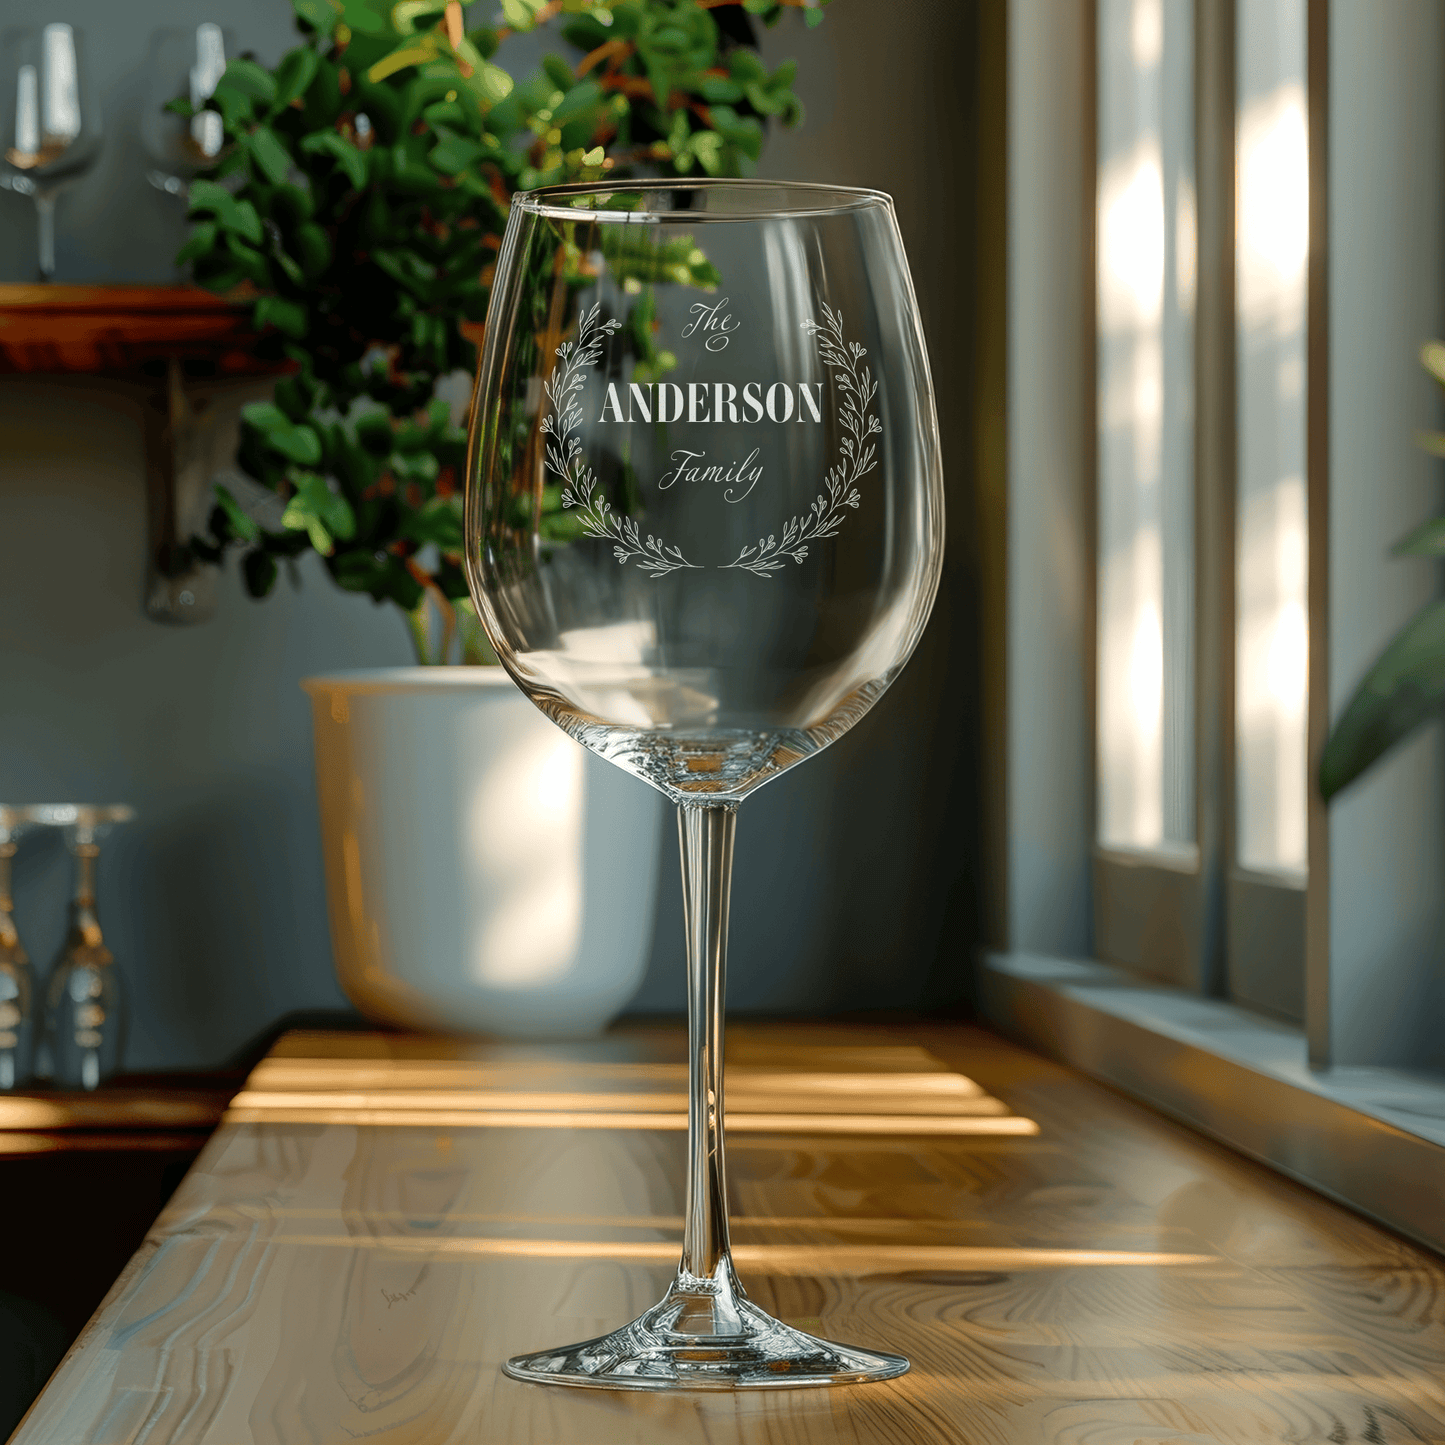 Personalized Wine Glasses Monogram Engraved with Your Family Name - The Ideal Couples' Gift - DM007